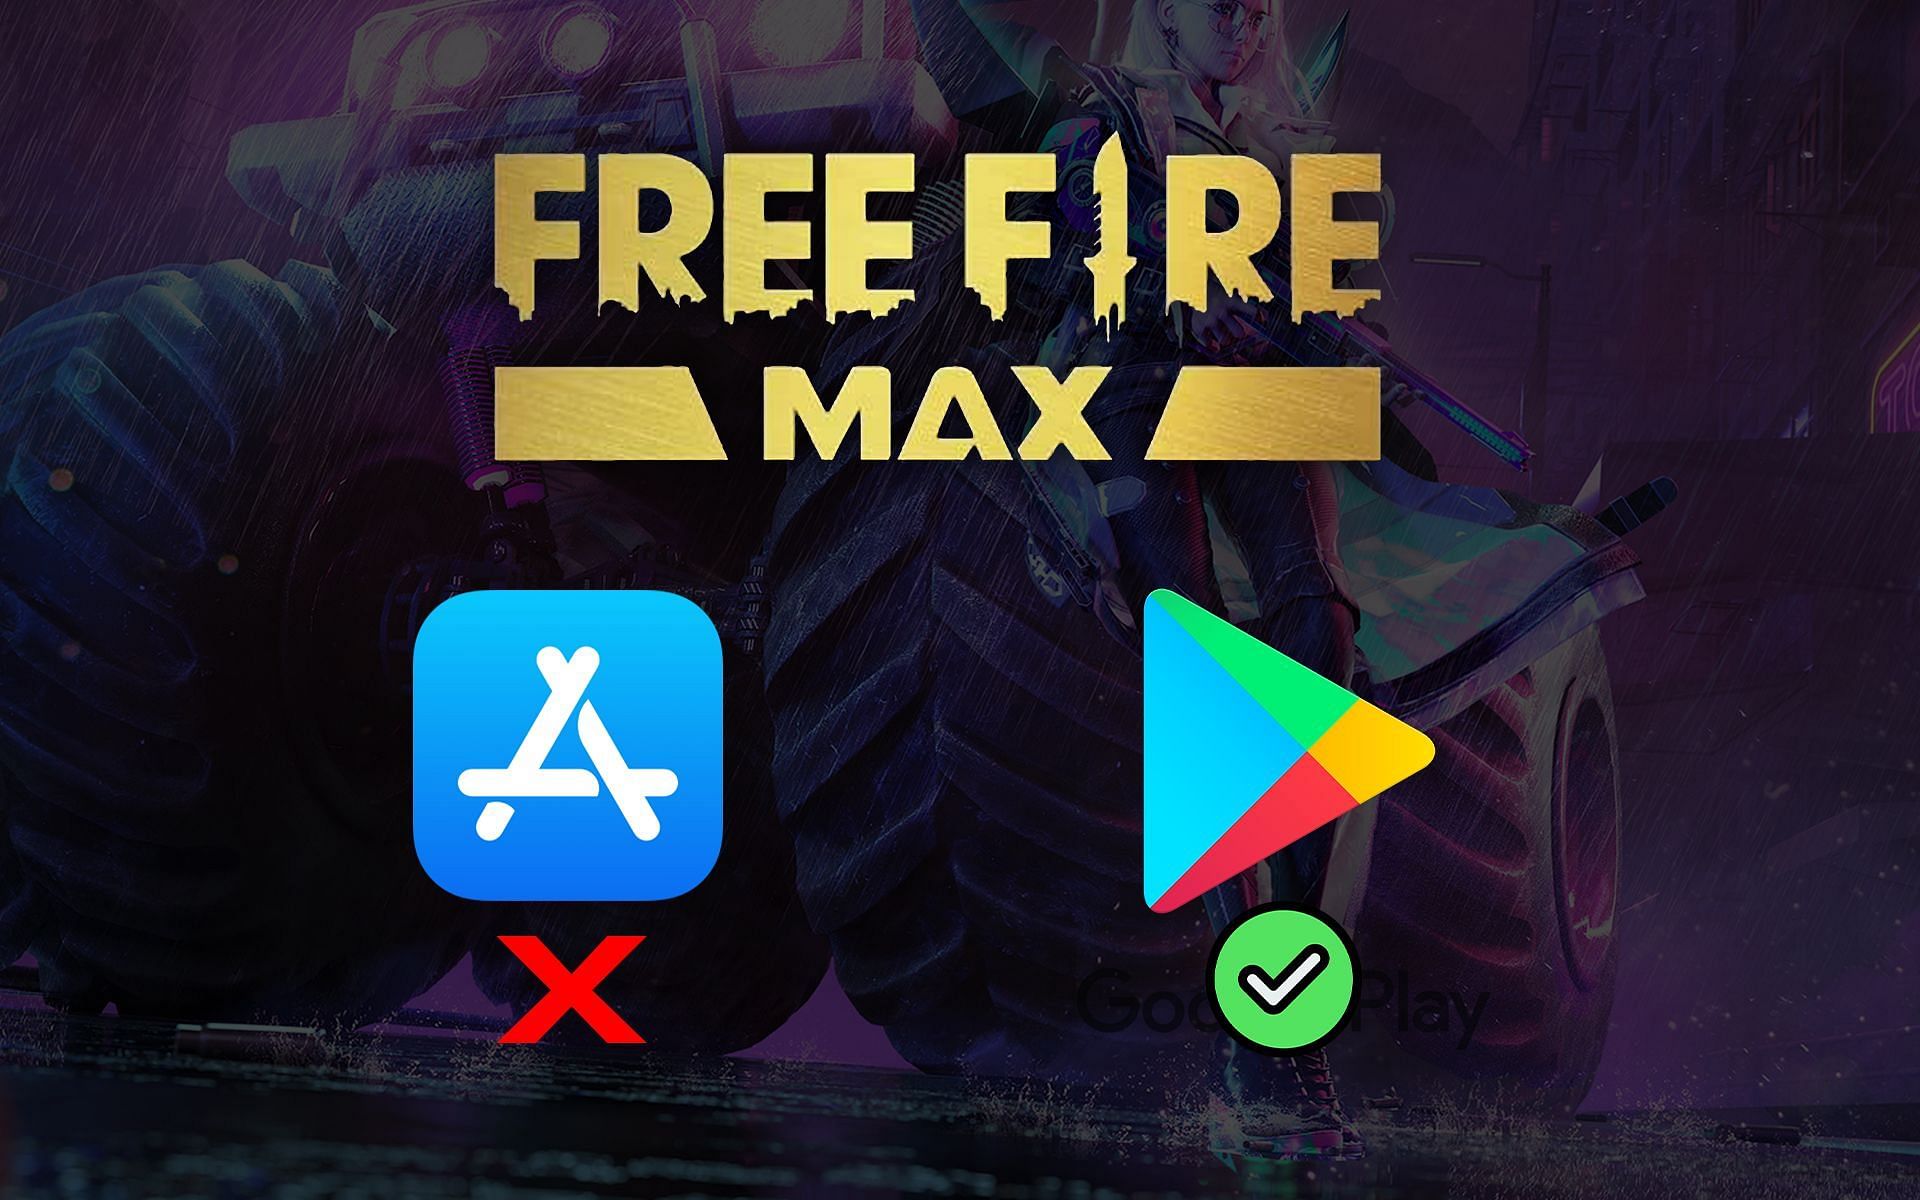 Free Fire MAX is only available on the Google Play Store, not Apple App Store (Image via Sportskeeda)